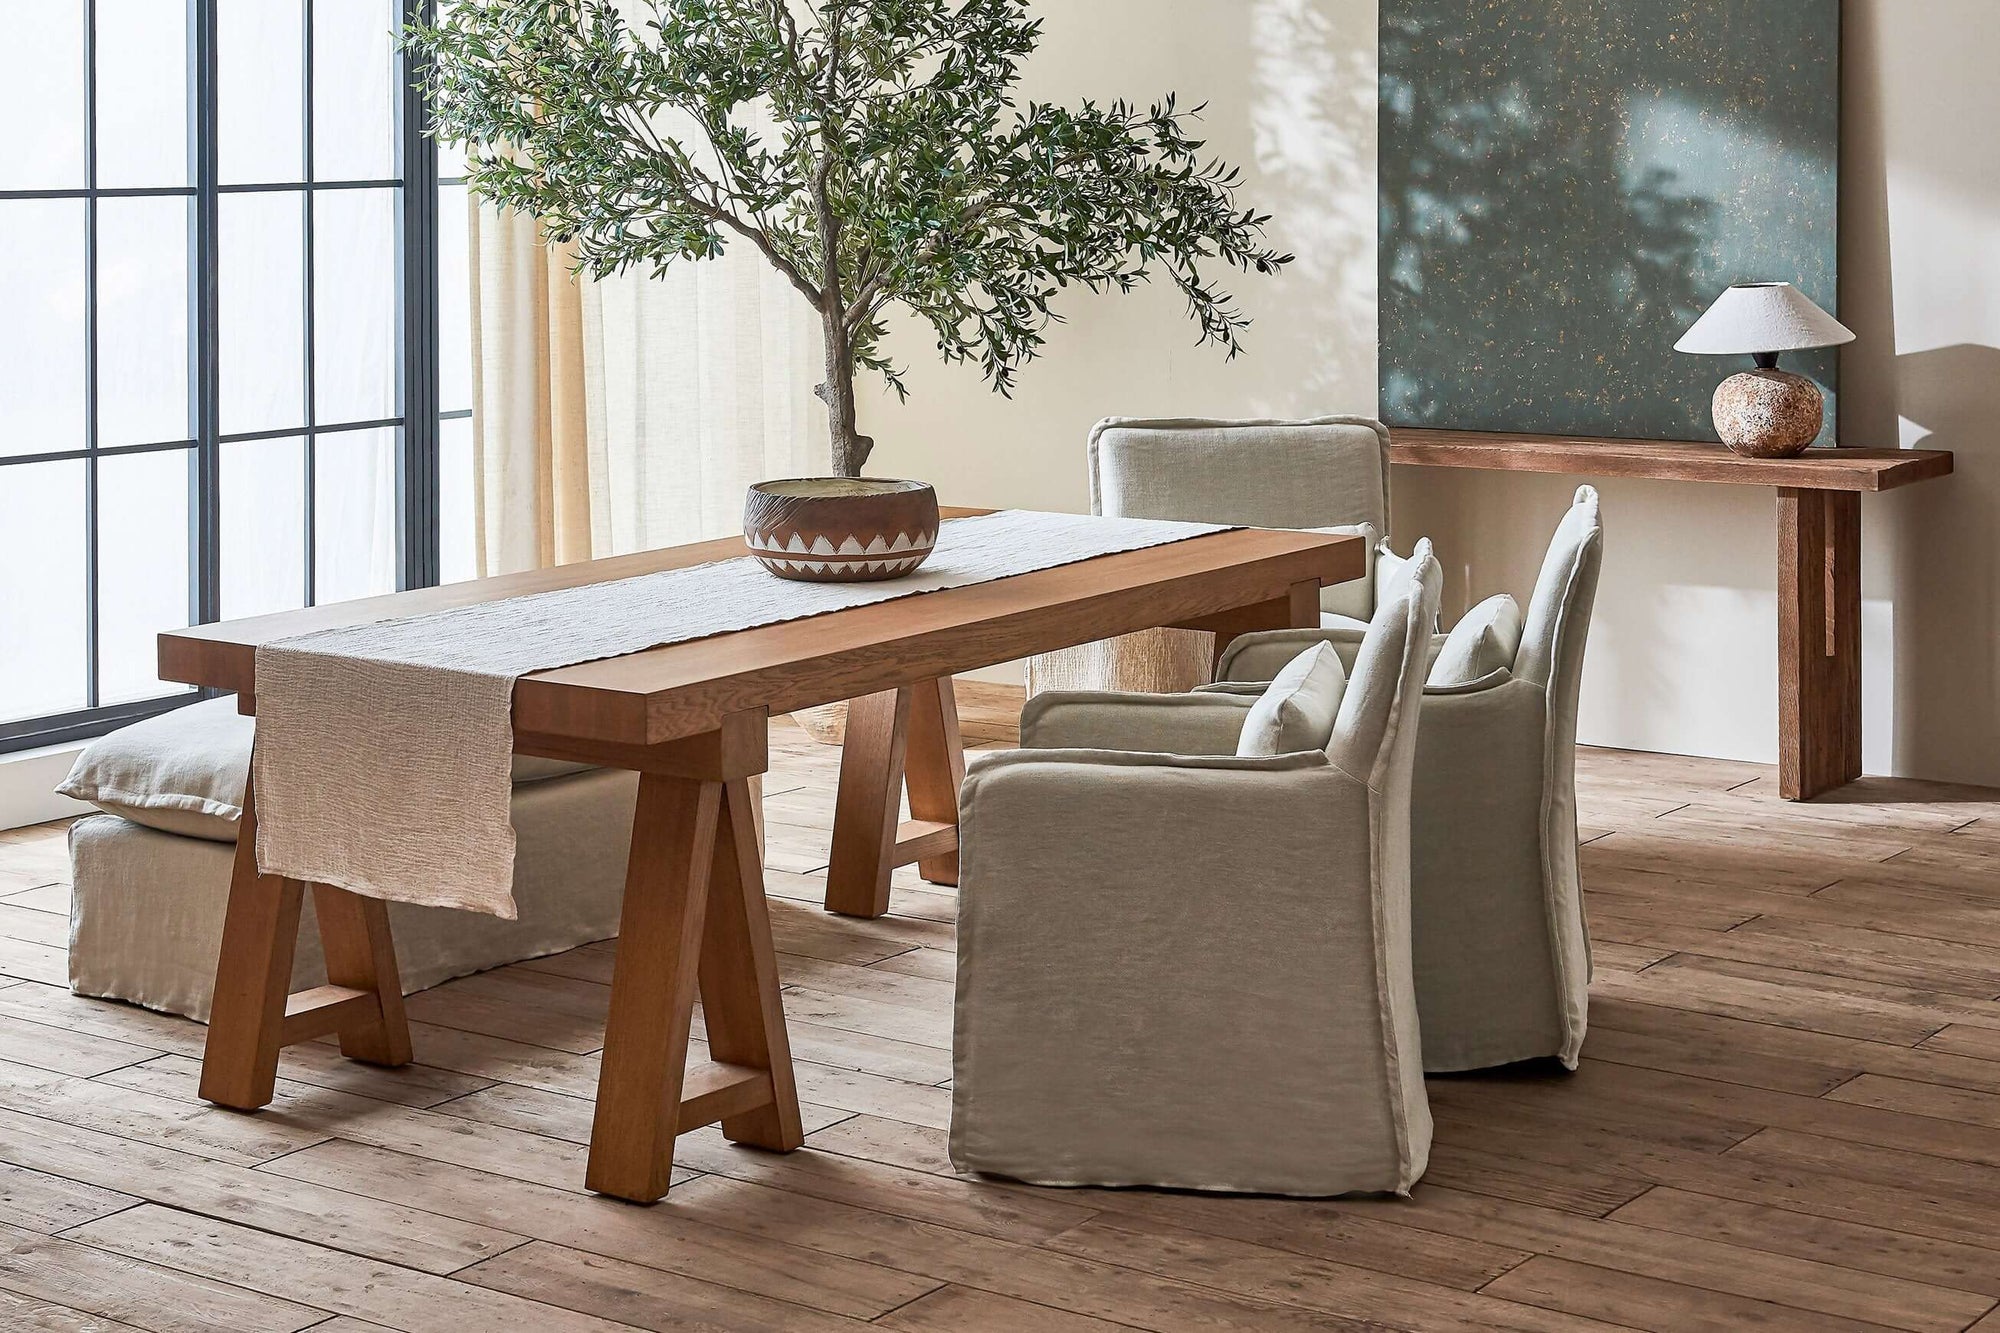 Three Melo Dining Chairs in Jasmine Rice, a light warm greige Medium Weight Linen, around a Rylance Dining Table decorated with a light cream linen table runner and a small potted tree